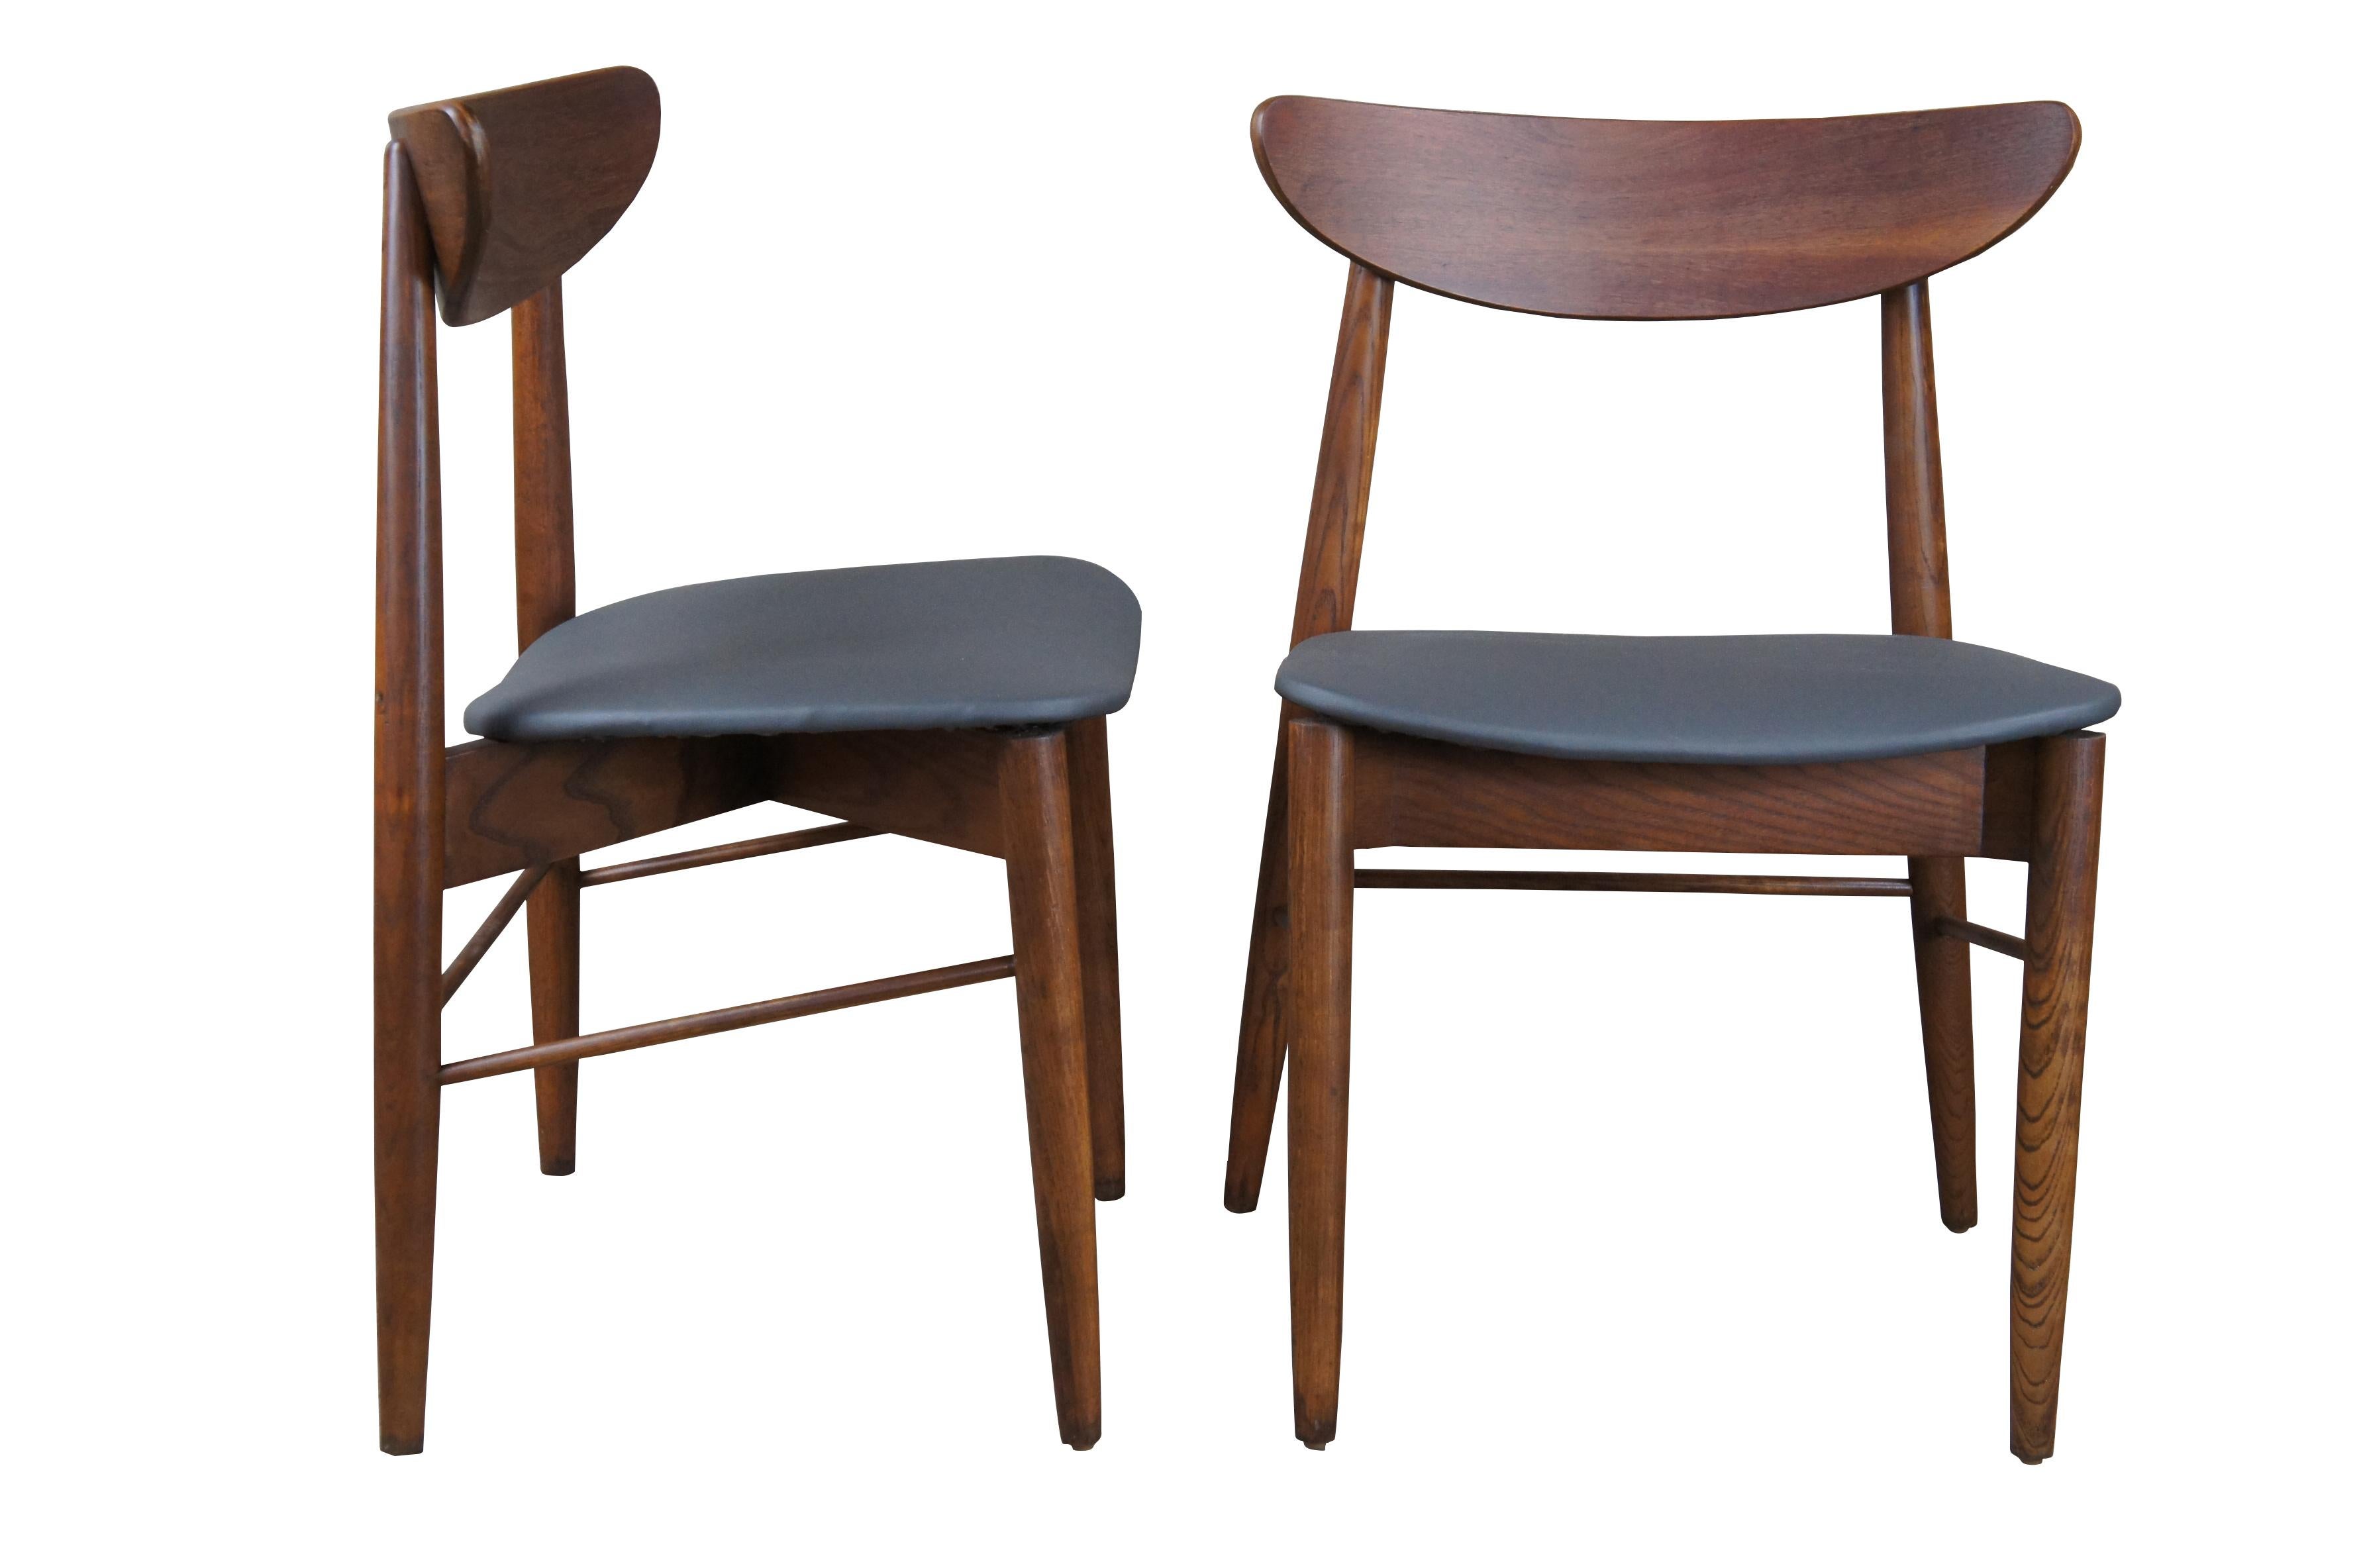 Stanley Mid-Century Modern side chairs, Circa 1960s. Made from walnut with a Danish or Scandinavian inspired design. Features a curved back and vinyl seat. Marked side chair 385.